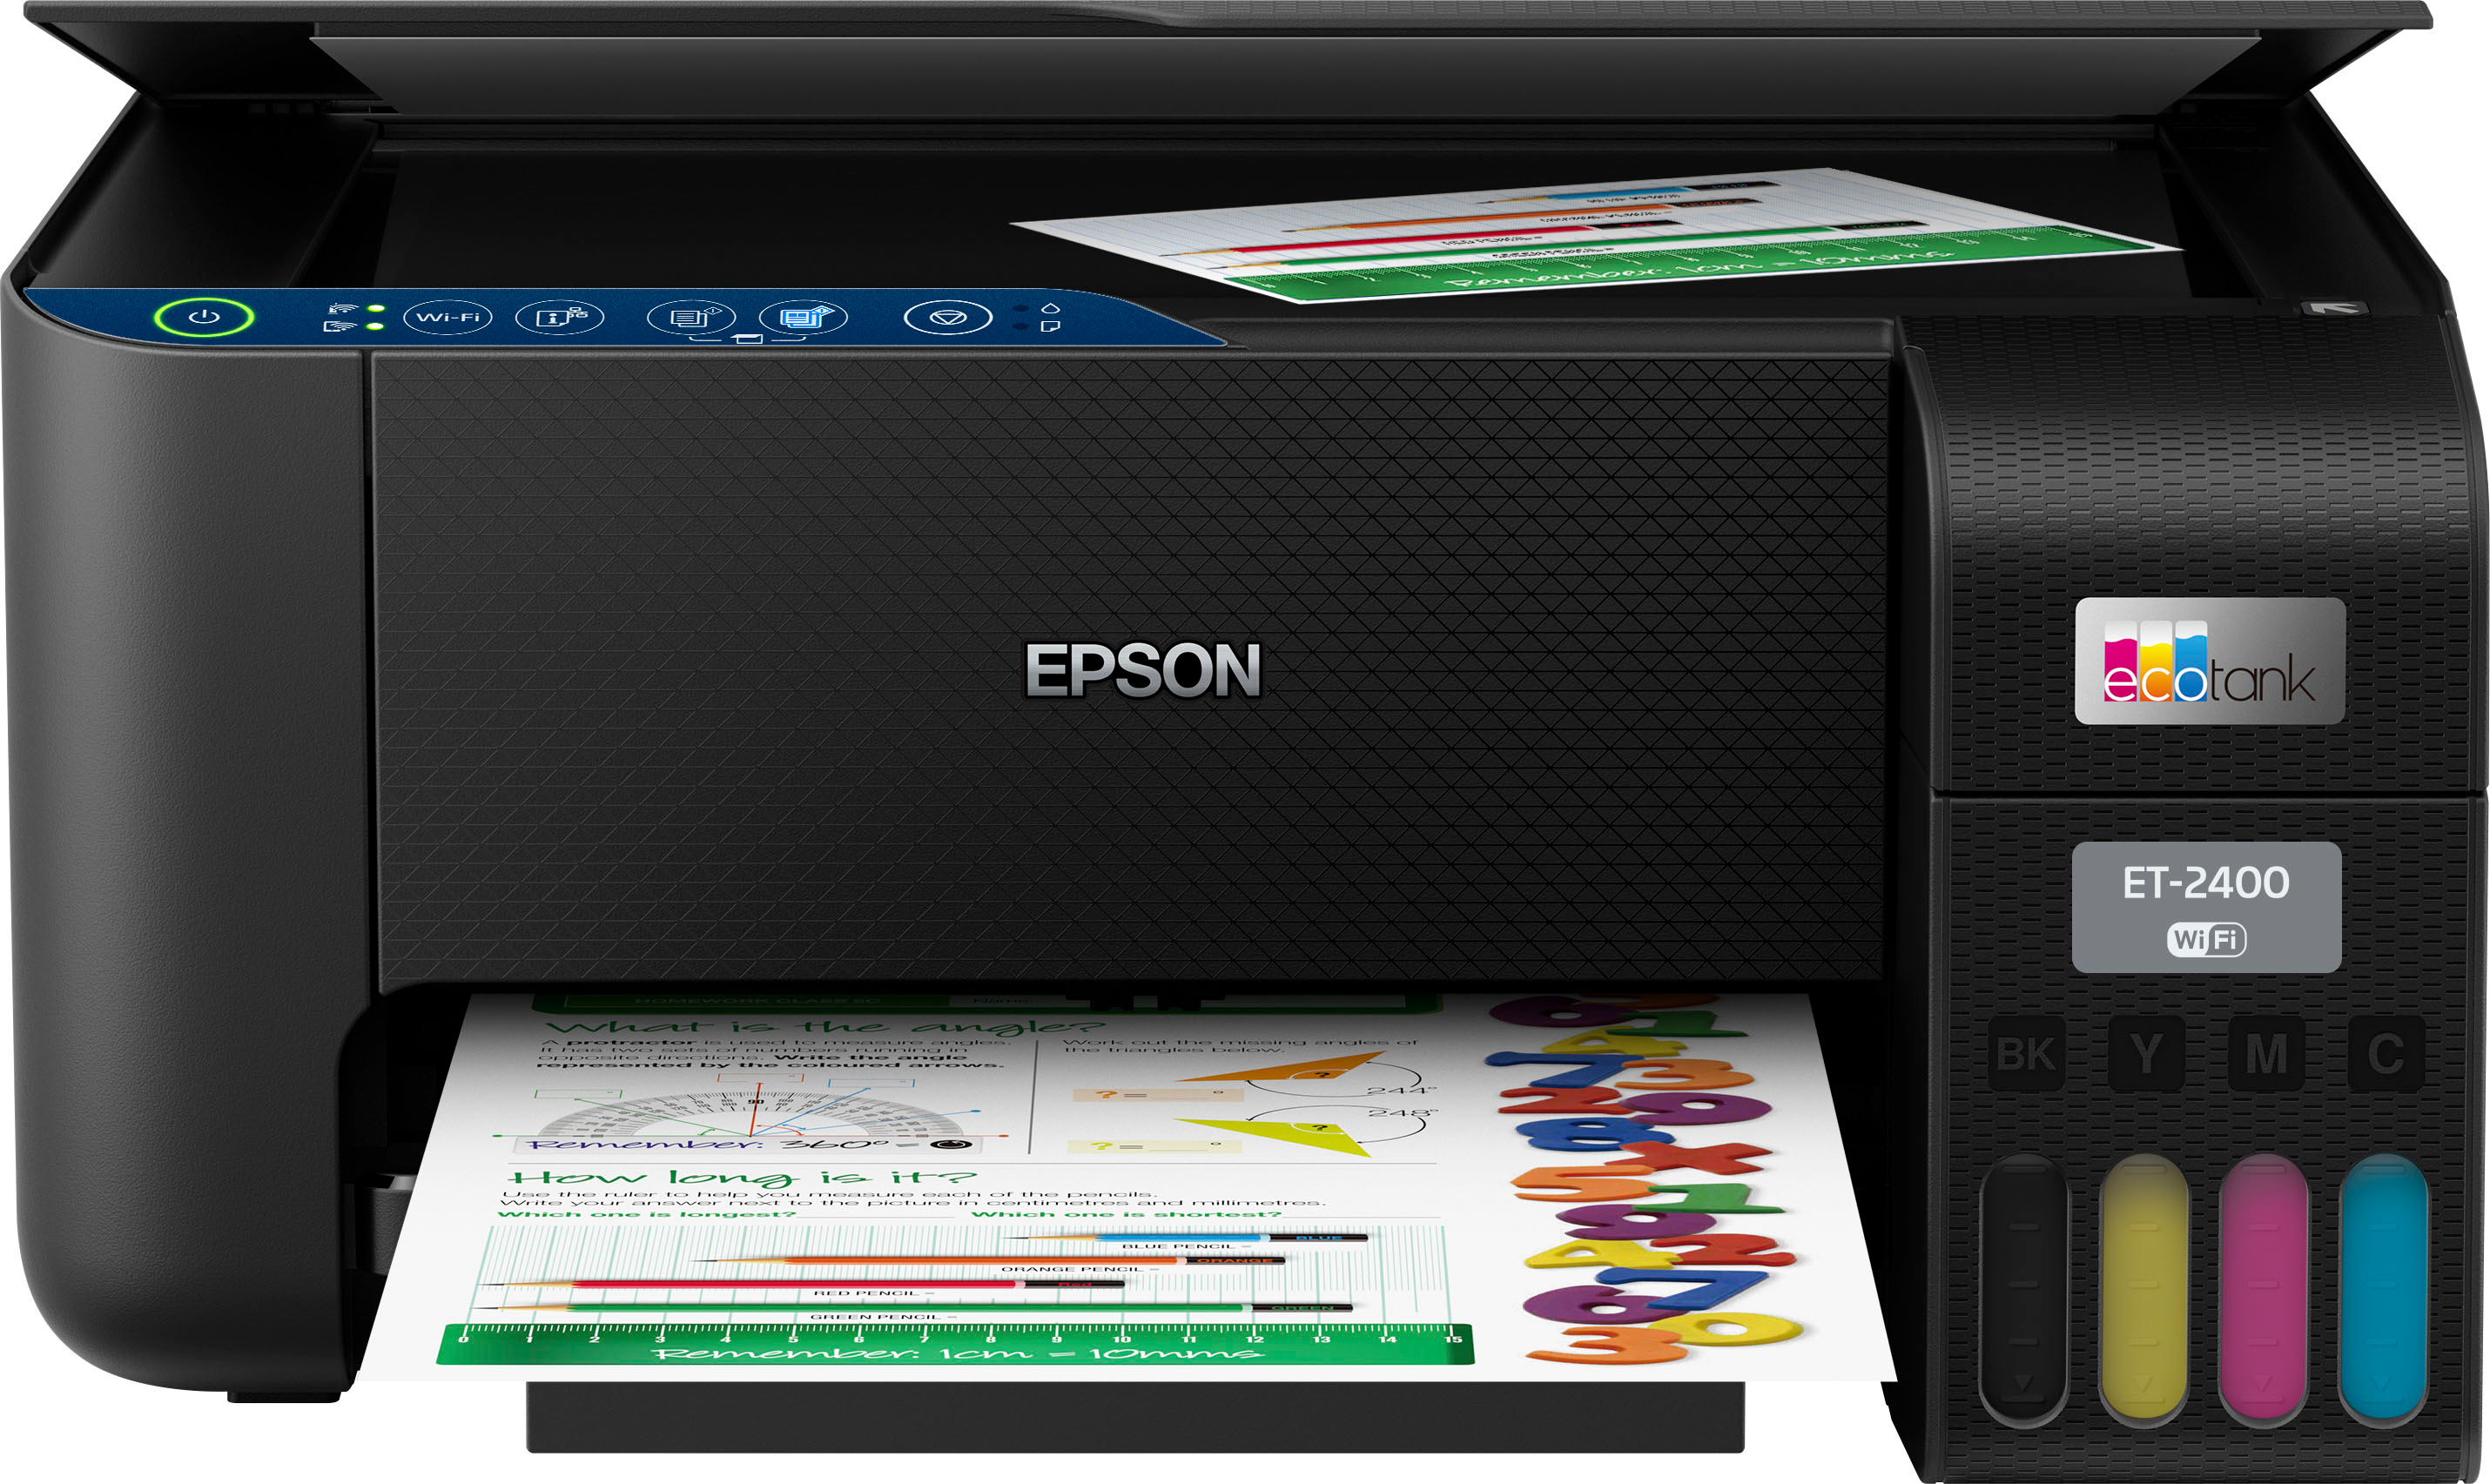 Tanks, Epson! EcoTank can print for years before you need to